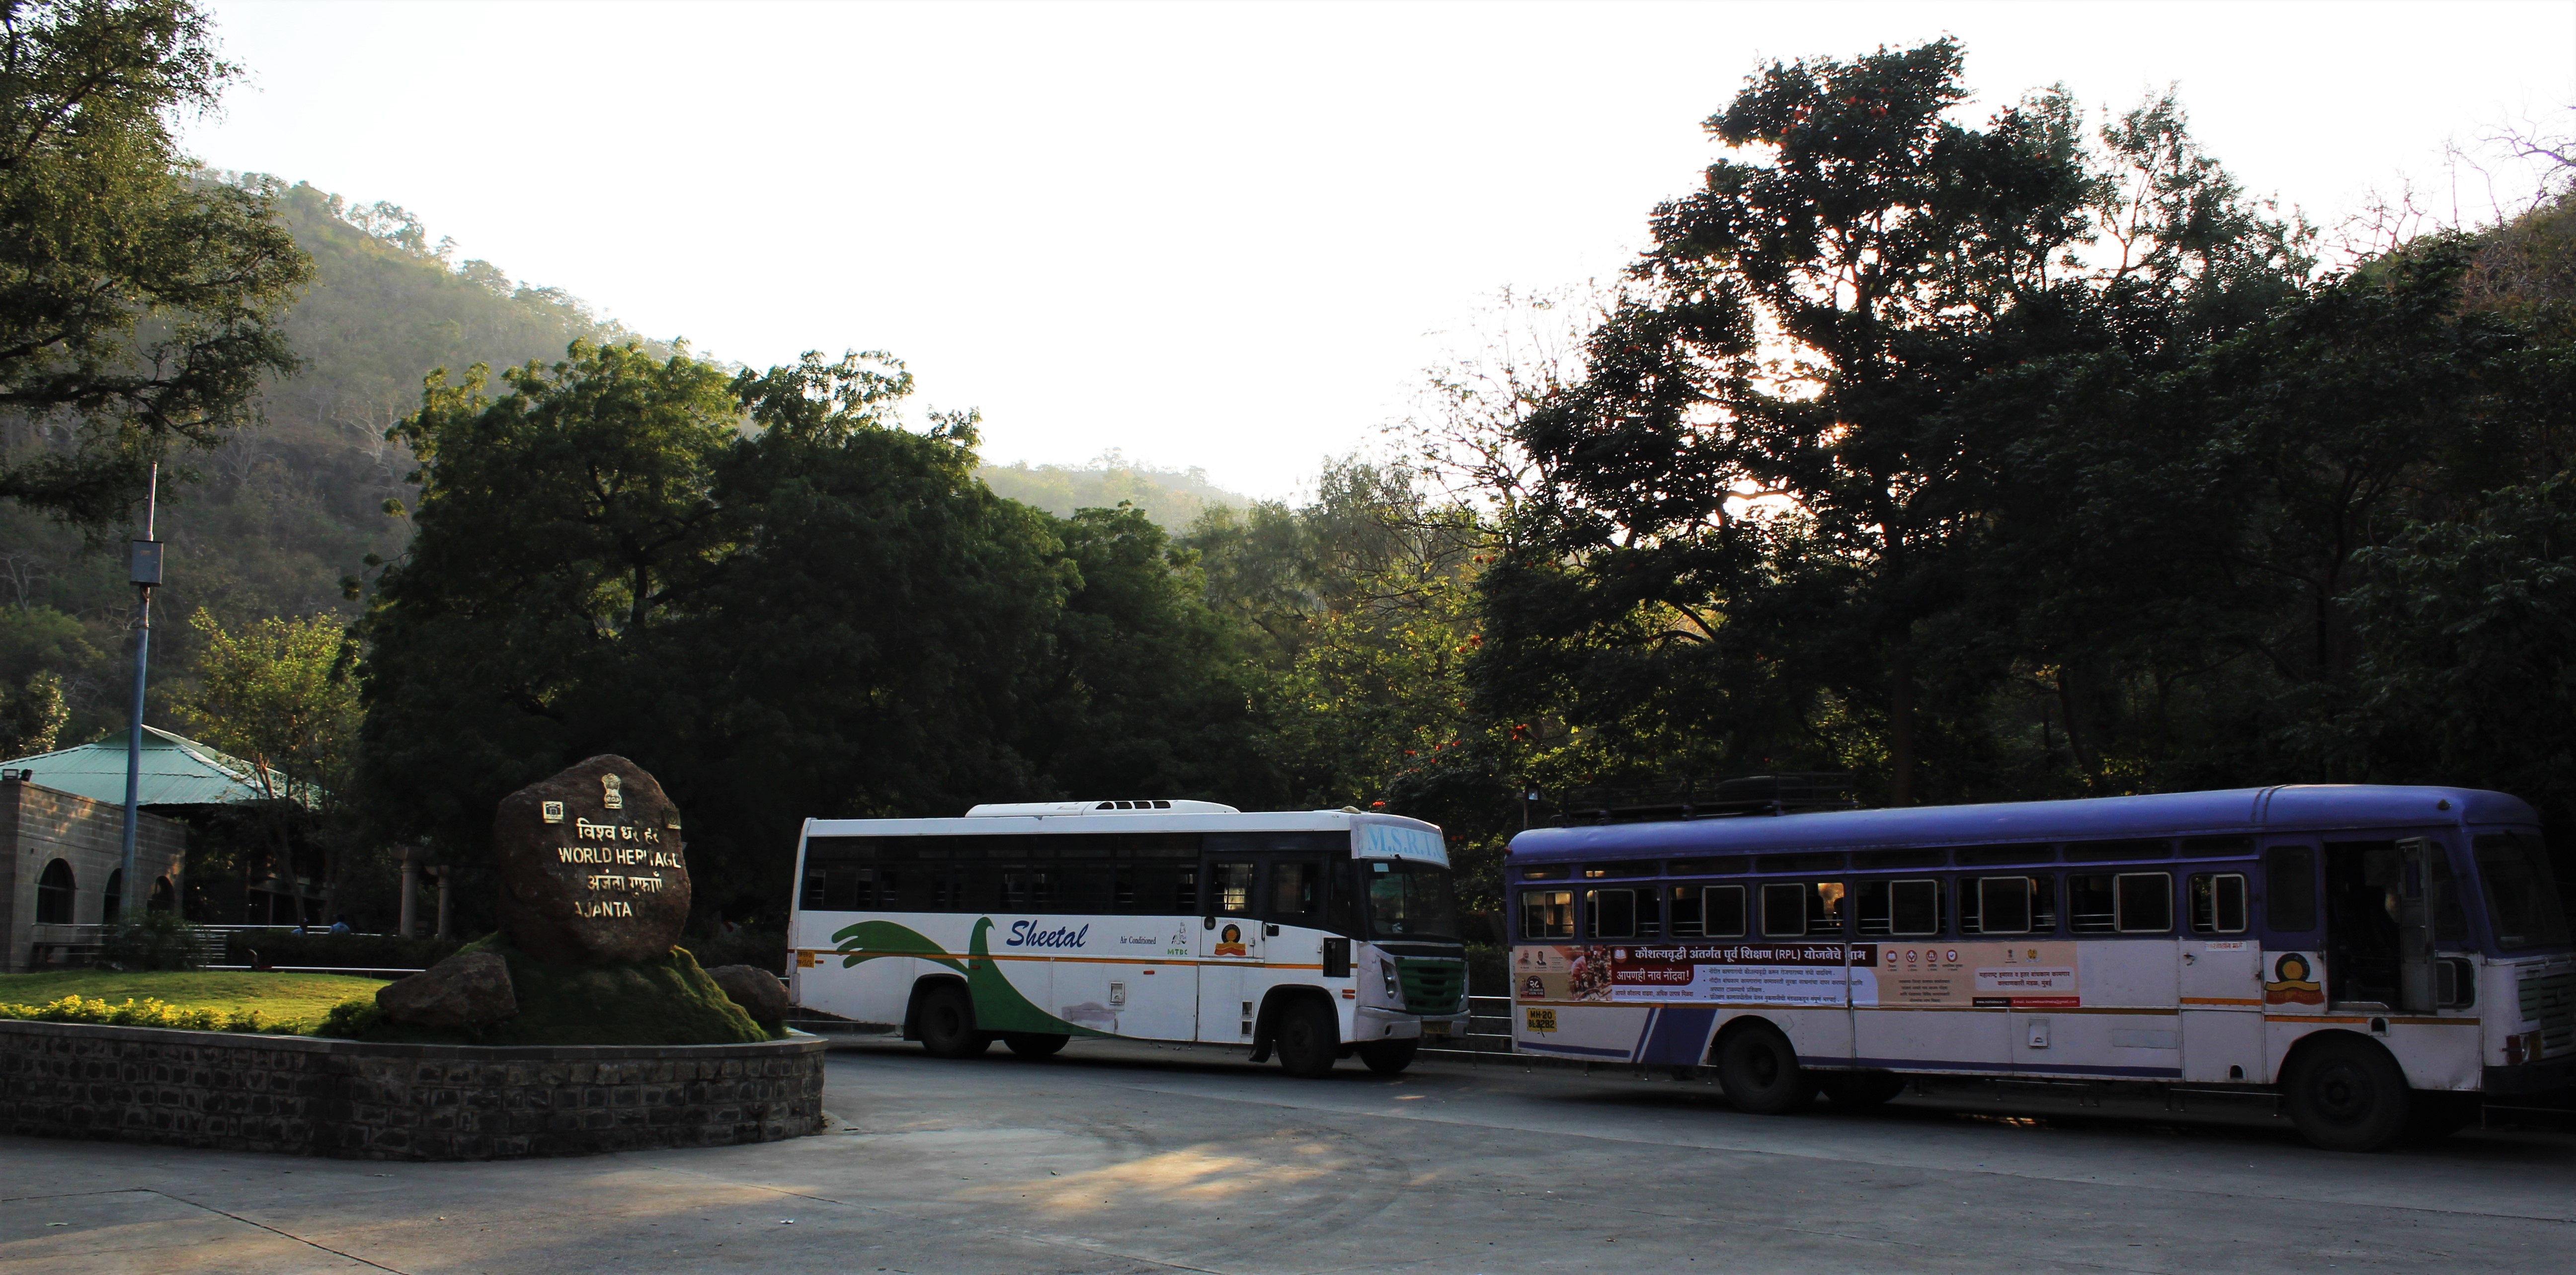 The Visitor Centre; buses are available to take the tourists to the Caves located higher up the ridge